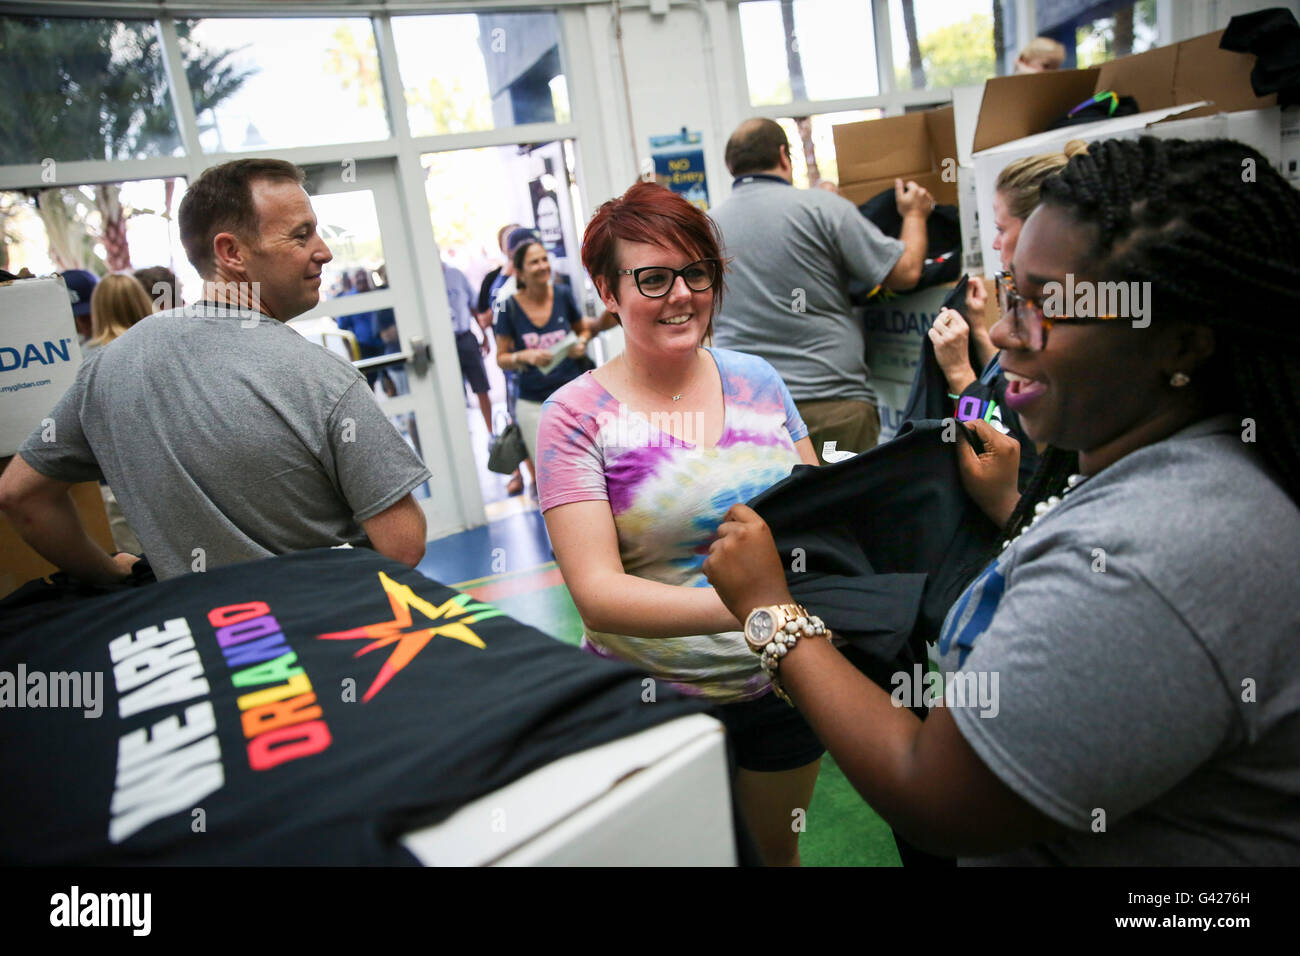 St. Petersburg, Florida, USA. 17th June, 2016. WILL VRAGOVIC | Times.Janelle Mahaffey, 30, center, of St. Petersburg takes a We Are Orlando shirt from Amber Mosley, right, with Rays Communications in the Rotunda at Gate 1 before the start of the game between the San Francisco Giants and the Tampa Bay Rays at Tropicana Field in St. Petersburg, Fla. on Friday, June 17, 2016. © Will Vragovic/Tampa Bay Times/ZUMA Wire/Alamy Live News Stock Photo